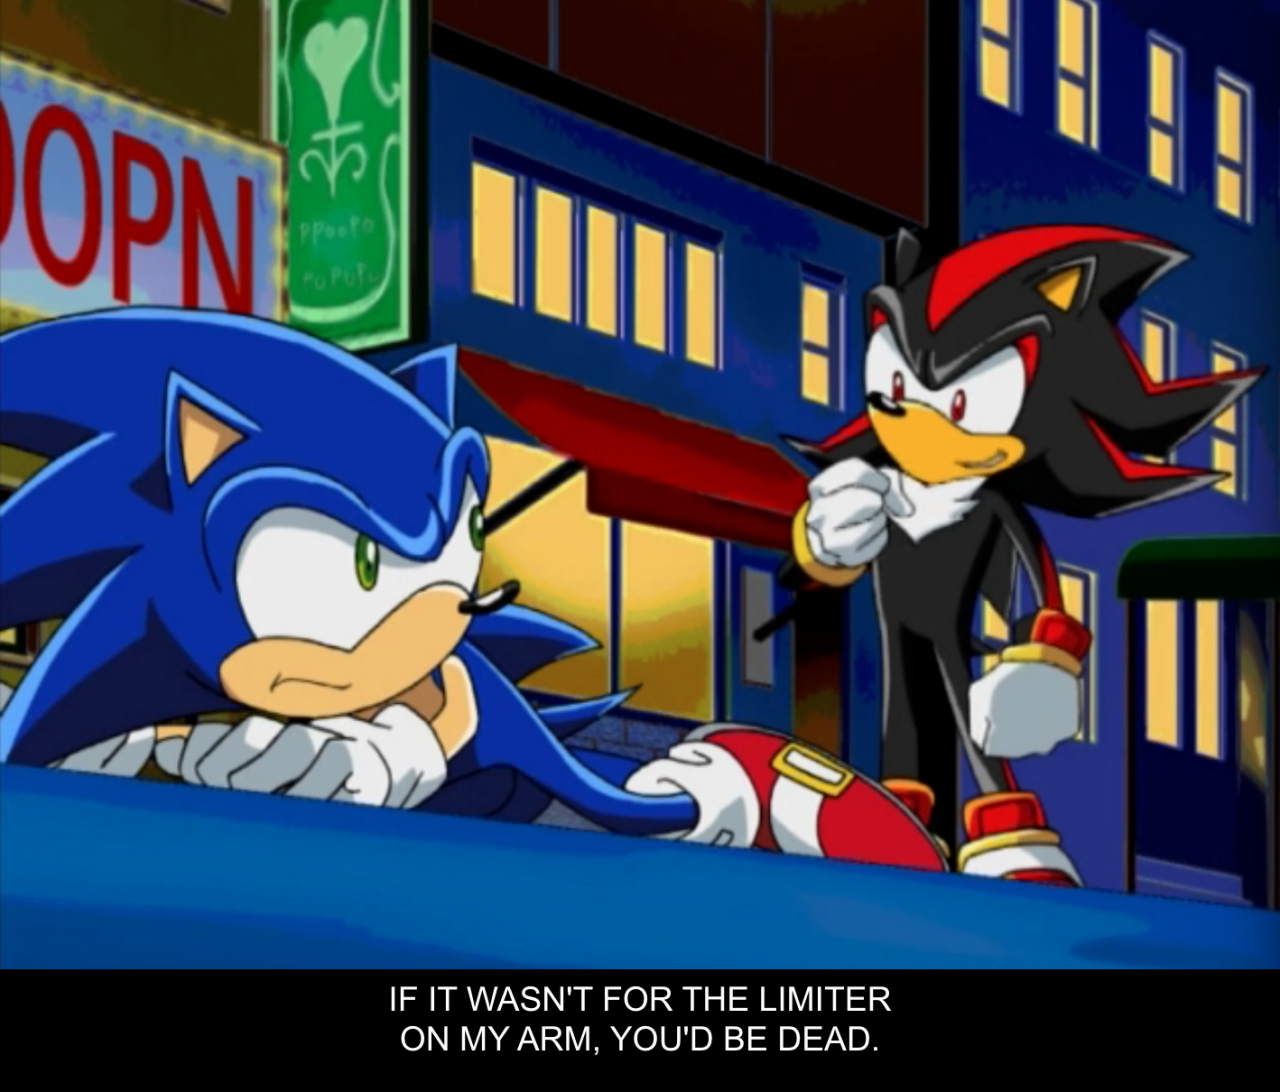 Sonic 2 & 3 Are Too Early For Those Shadow Theories To Come True